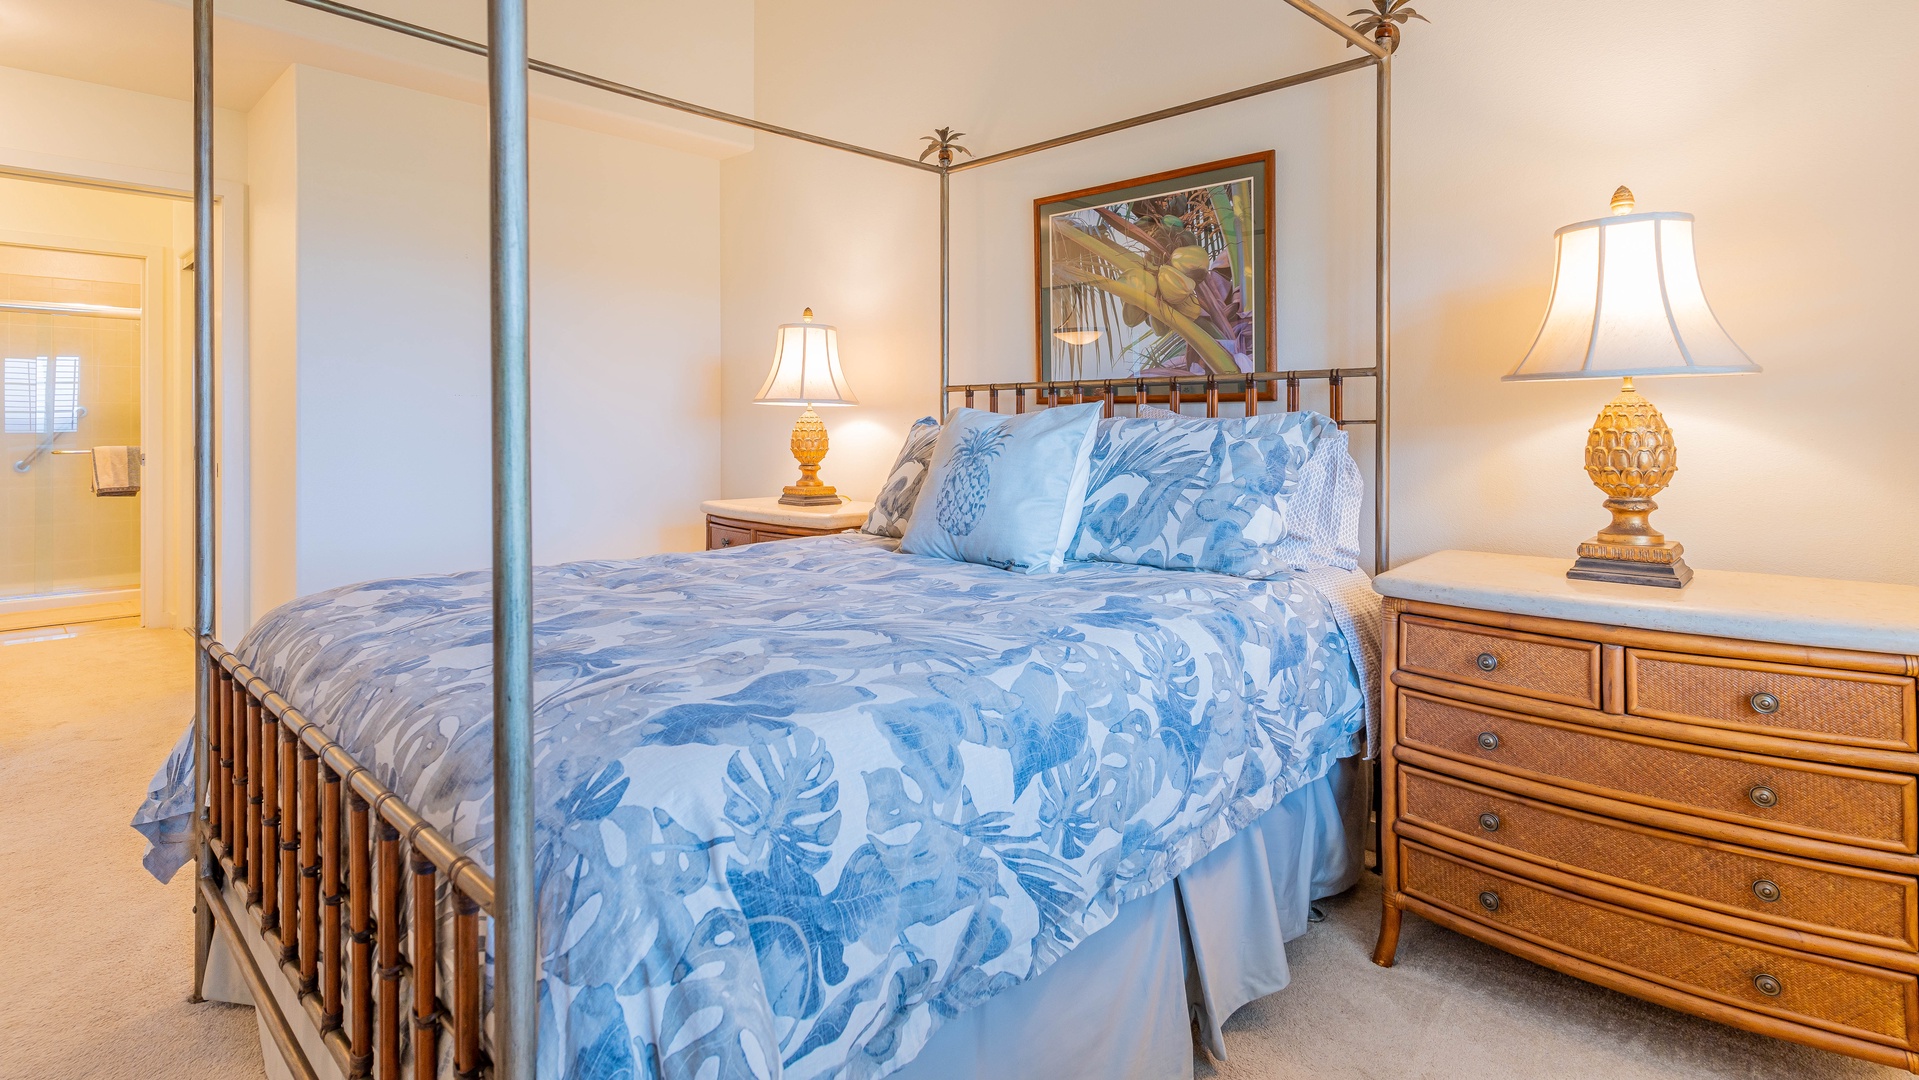 Kapolei Vacation Rentals, Kai Lani 20C - The primary guest bedroom is spacious with soft linens and framed art.